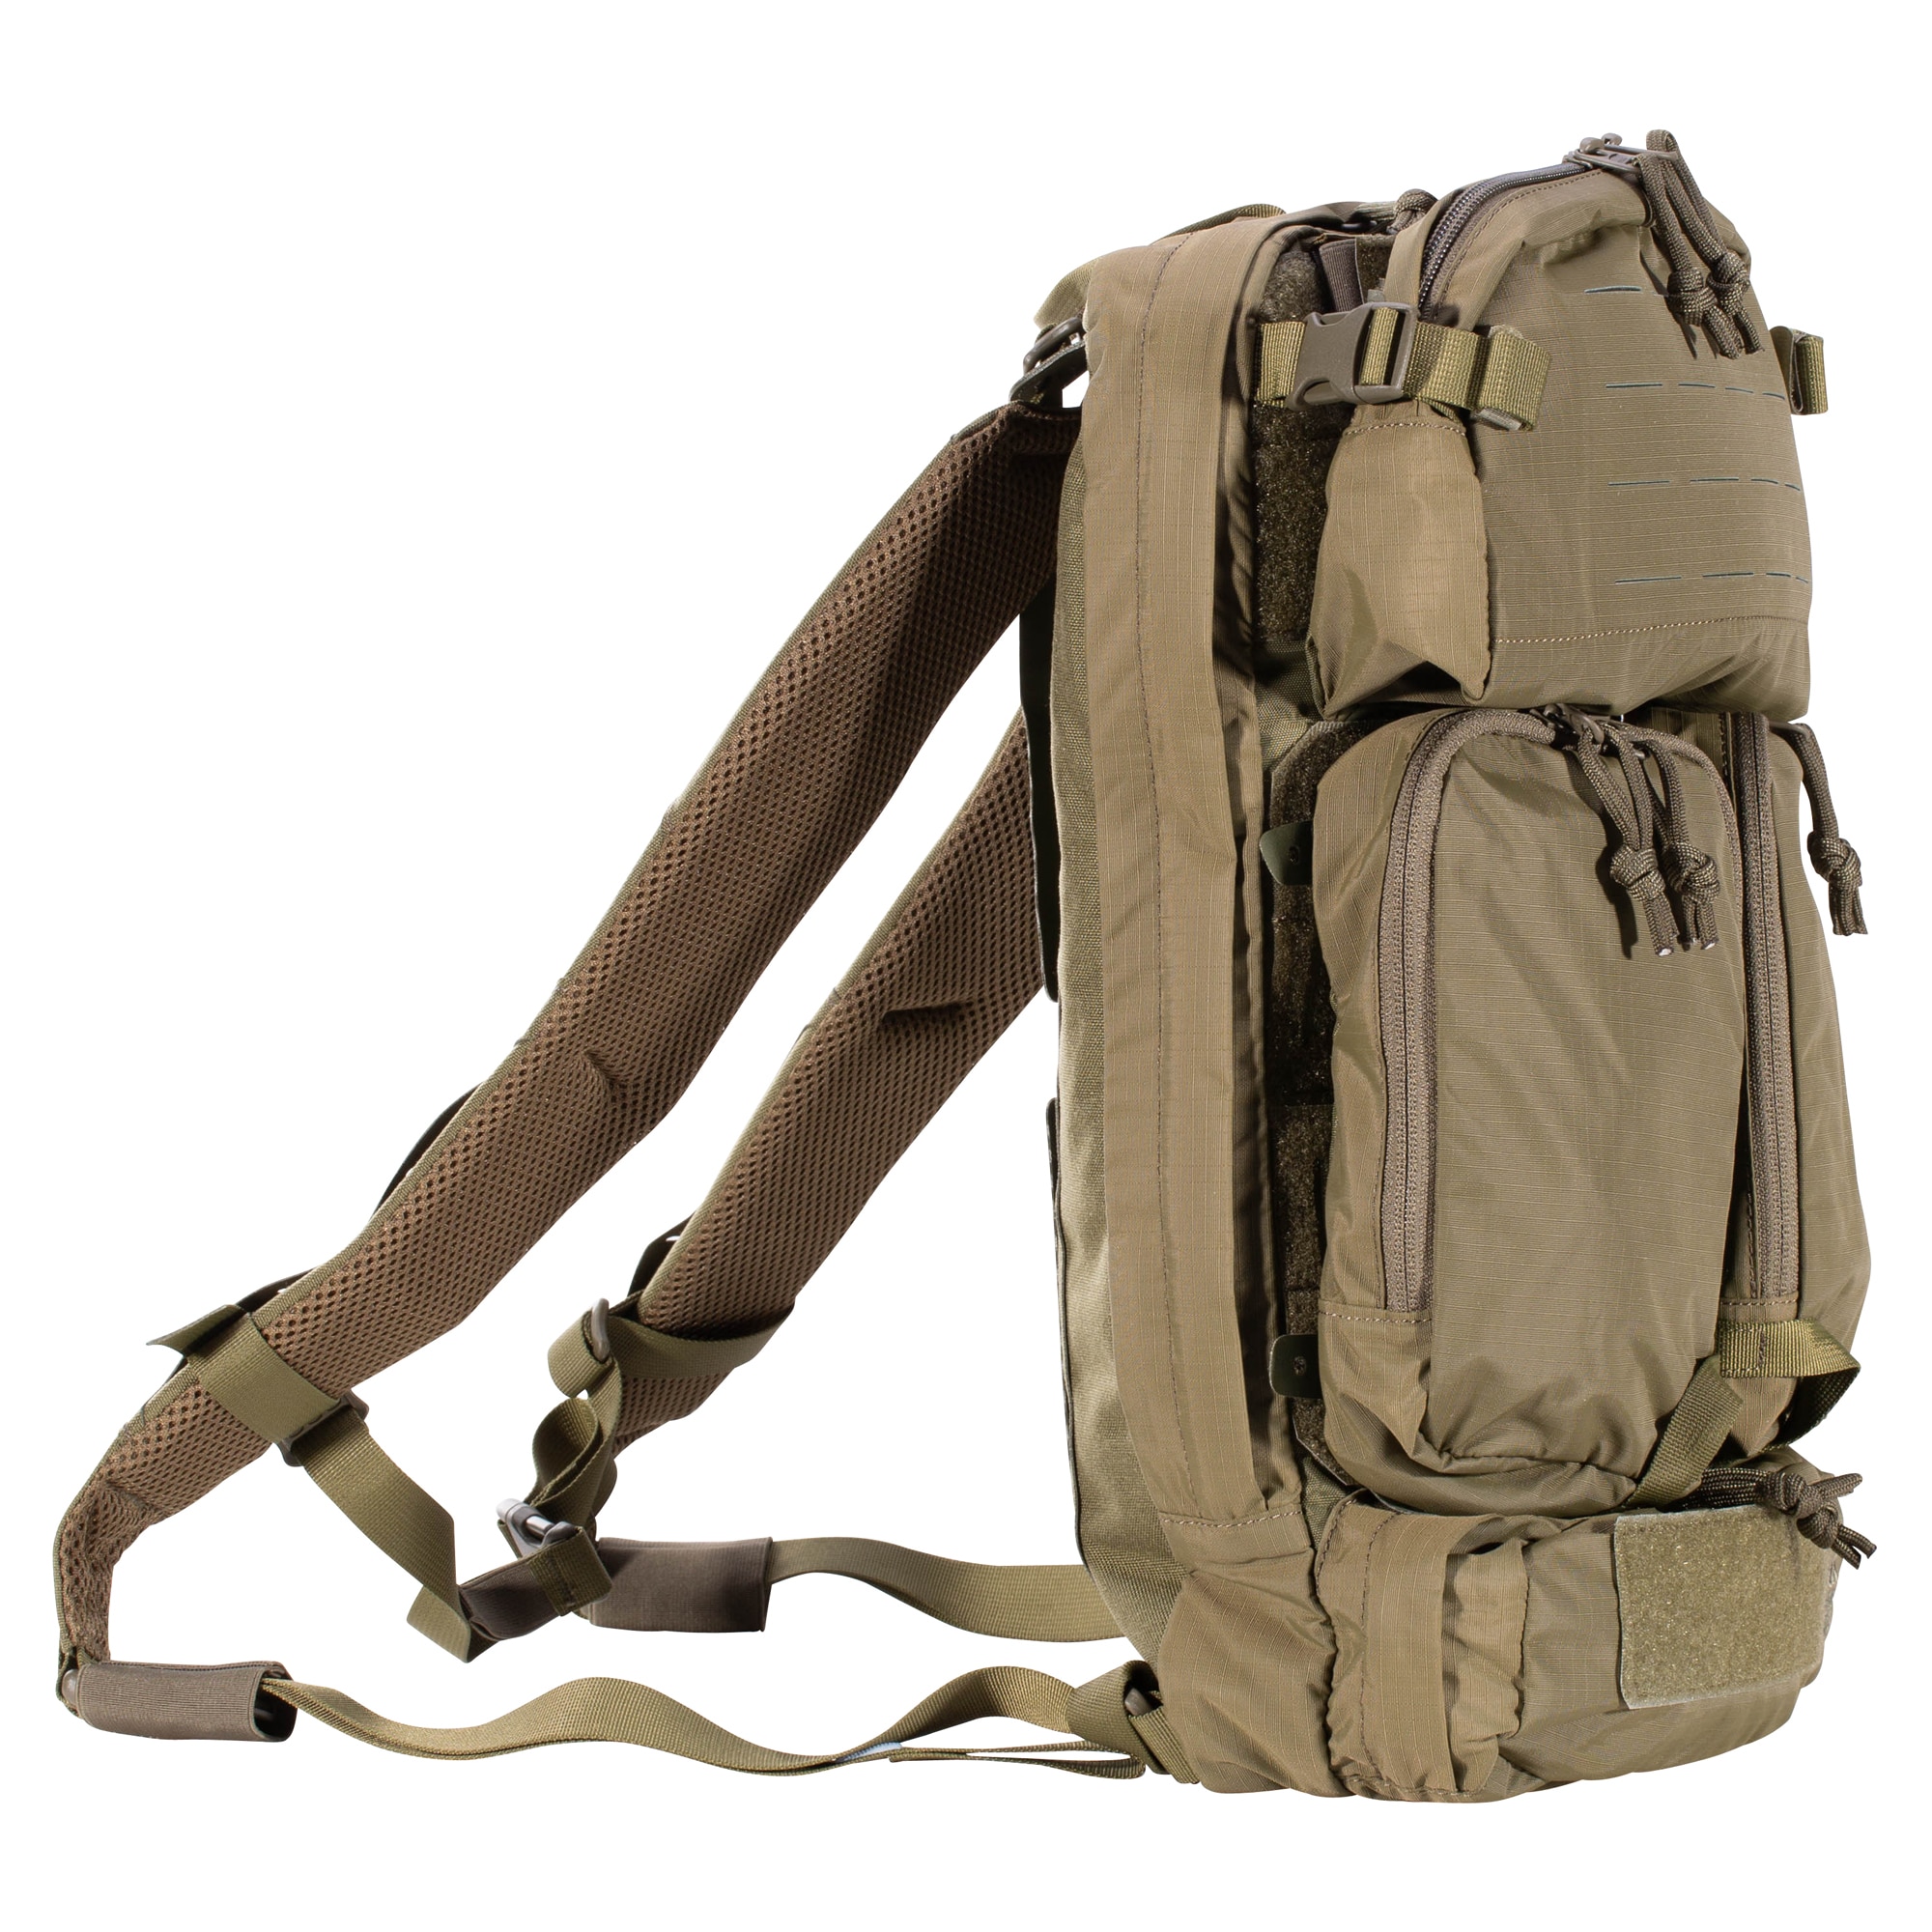 Purchase the Tasmanian Tiger Backpack Modular Gunners Pack olive